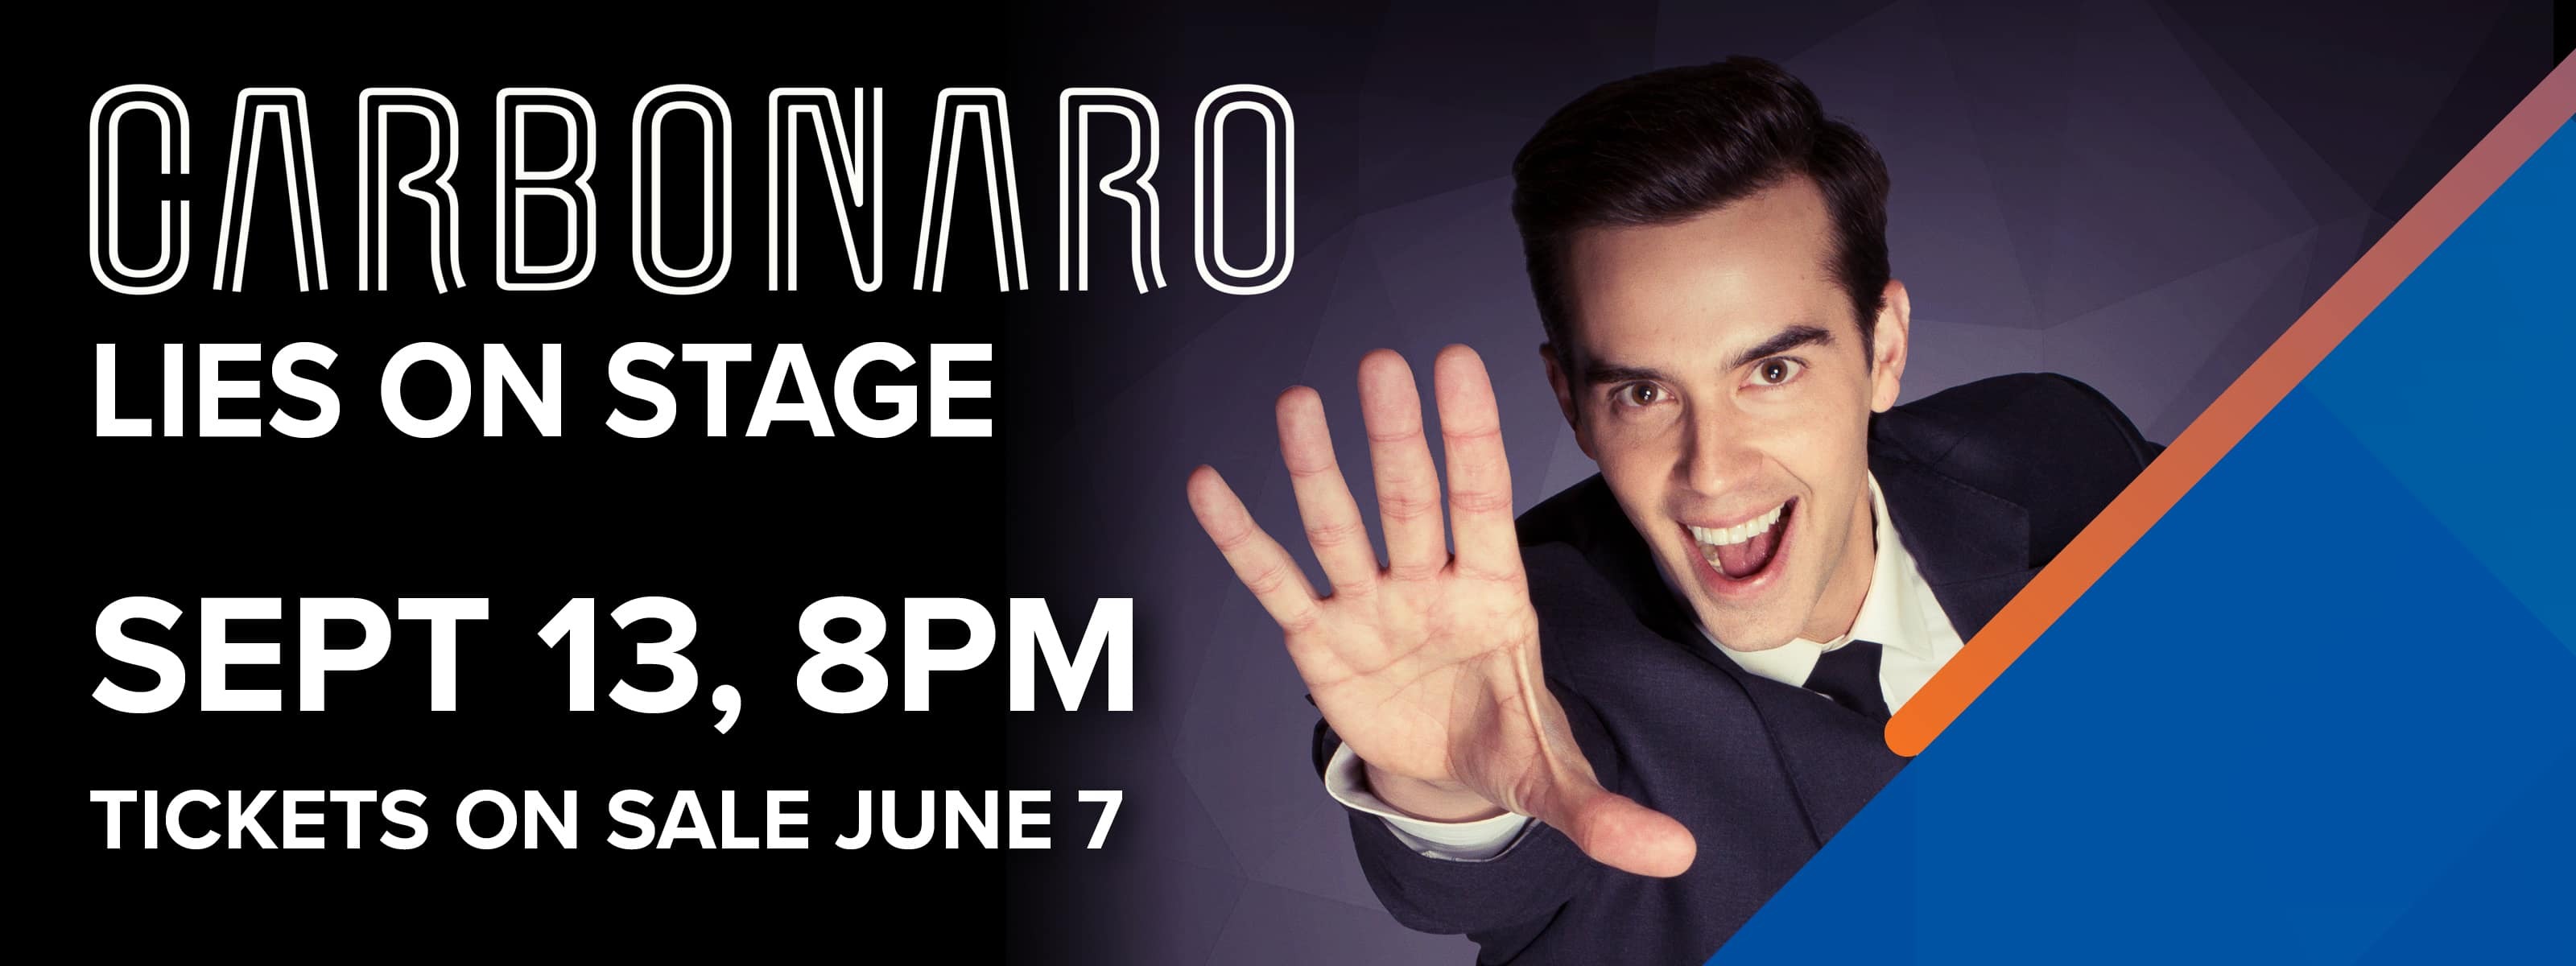 CARBONARO: LIES ON STAGE - September 13, 8:00pm Tickets On Sale June 7 @ 10am